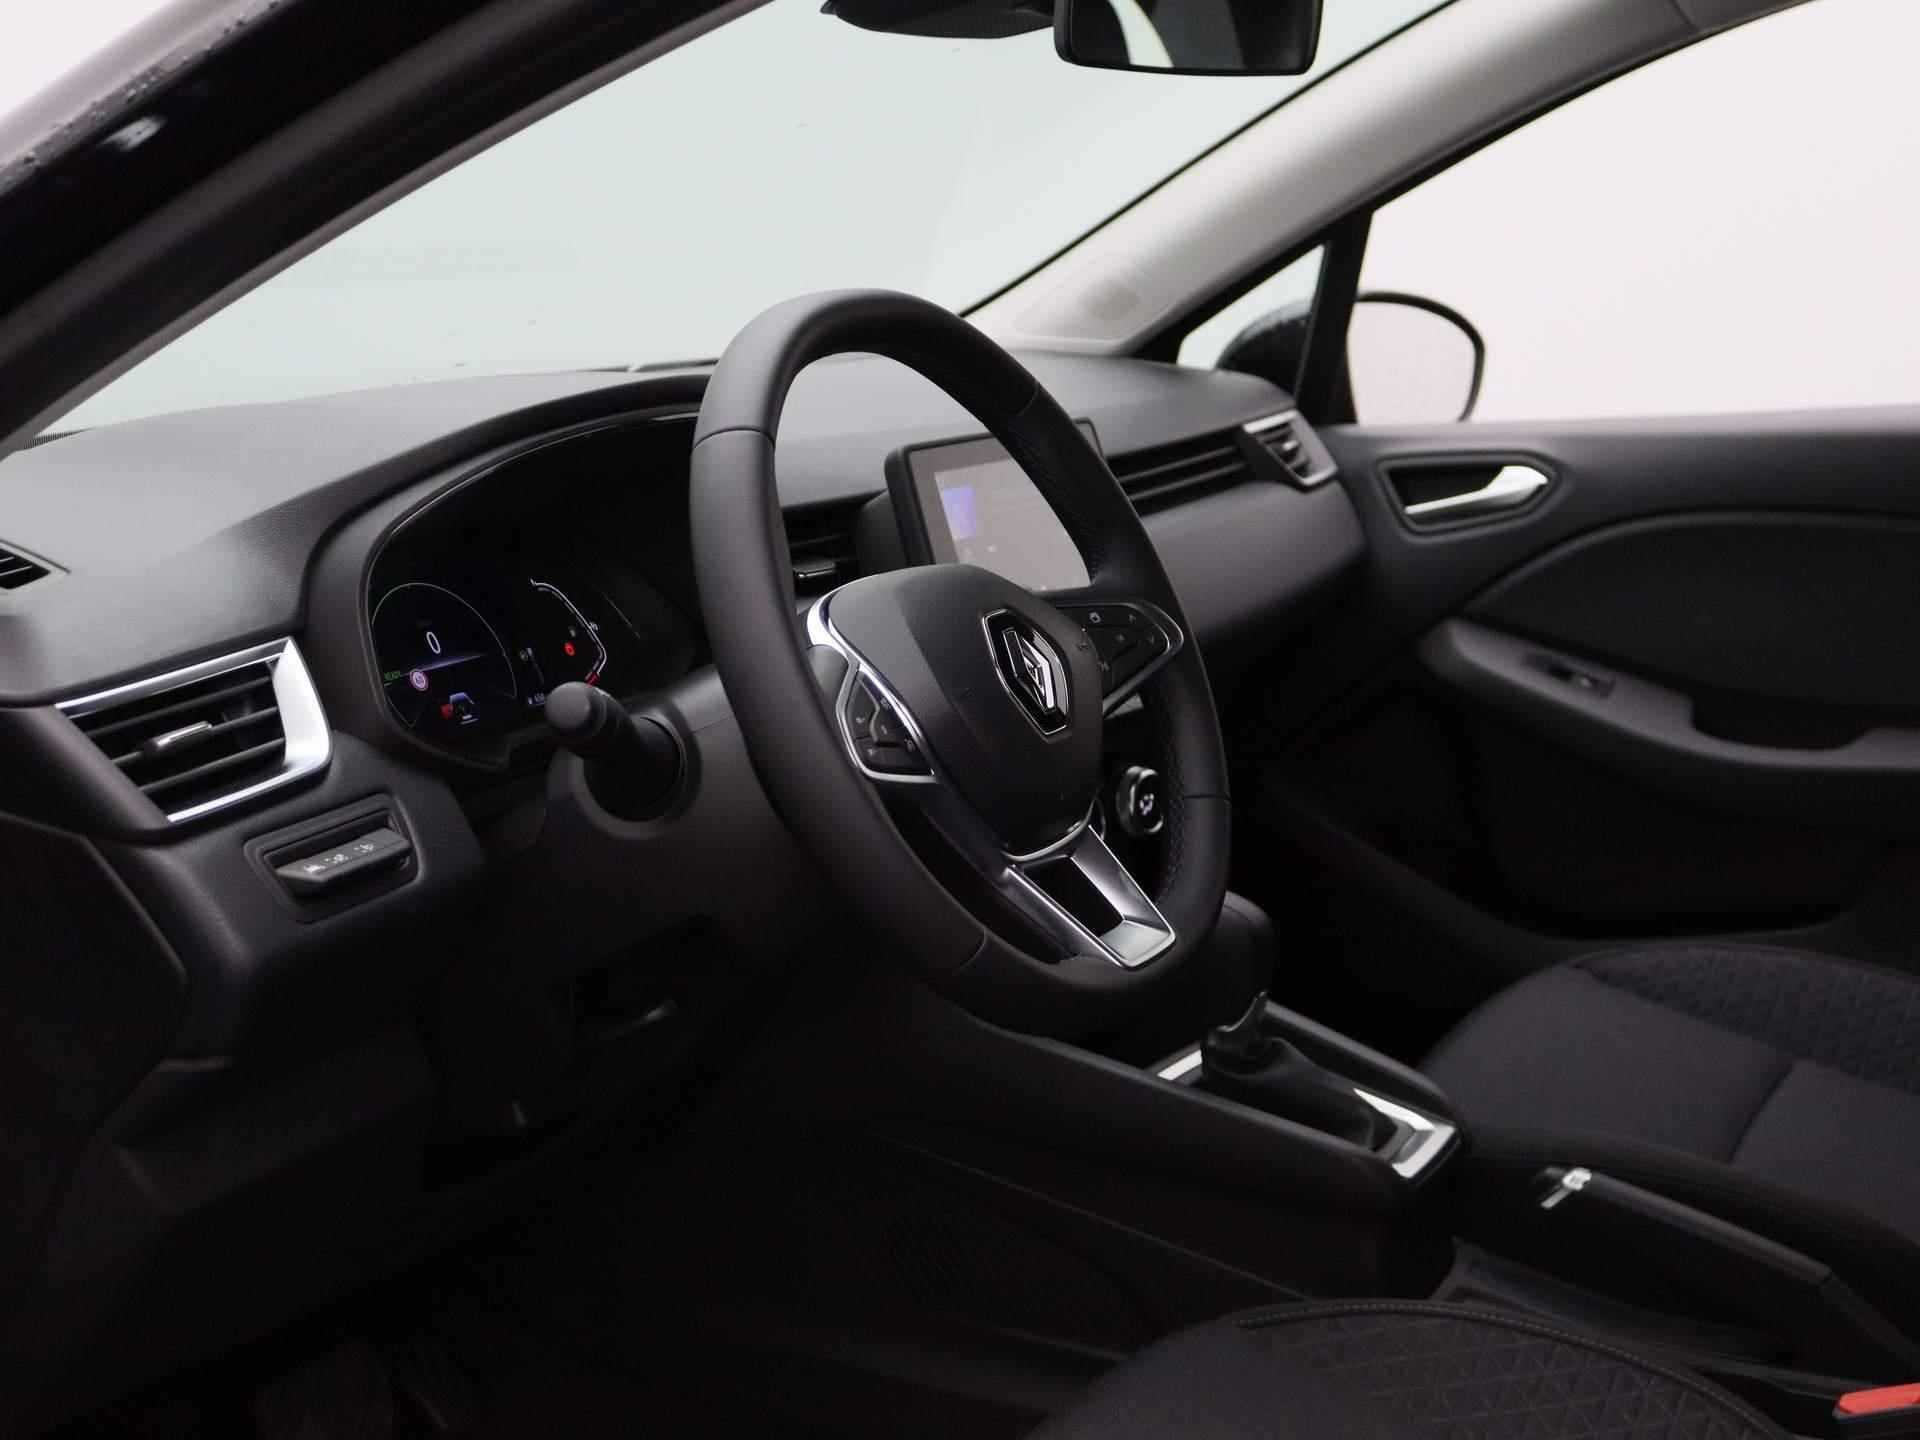 Renault Clio 1.6 E-Tech Full Hybrid 145 Equilibre | PDC Achter | Airconditioning | Draadloze Apple Carplay & Android Auto | Cruise Control | Licht- en regensensor - 29/36